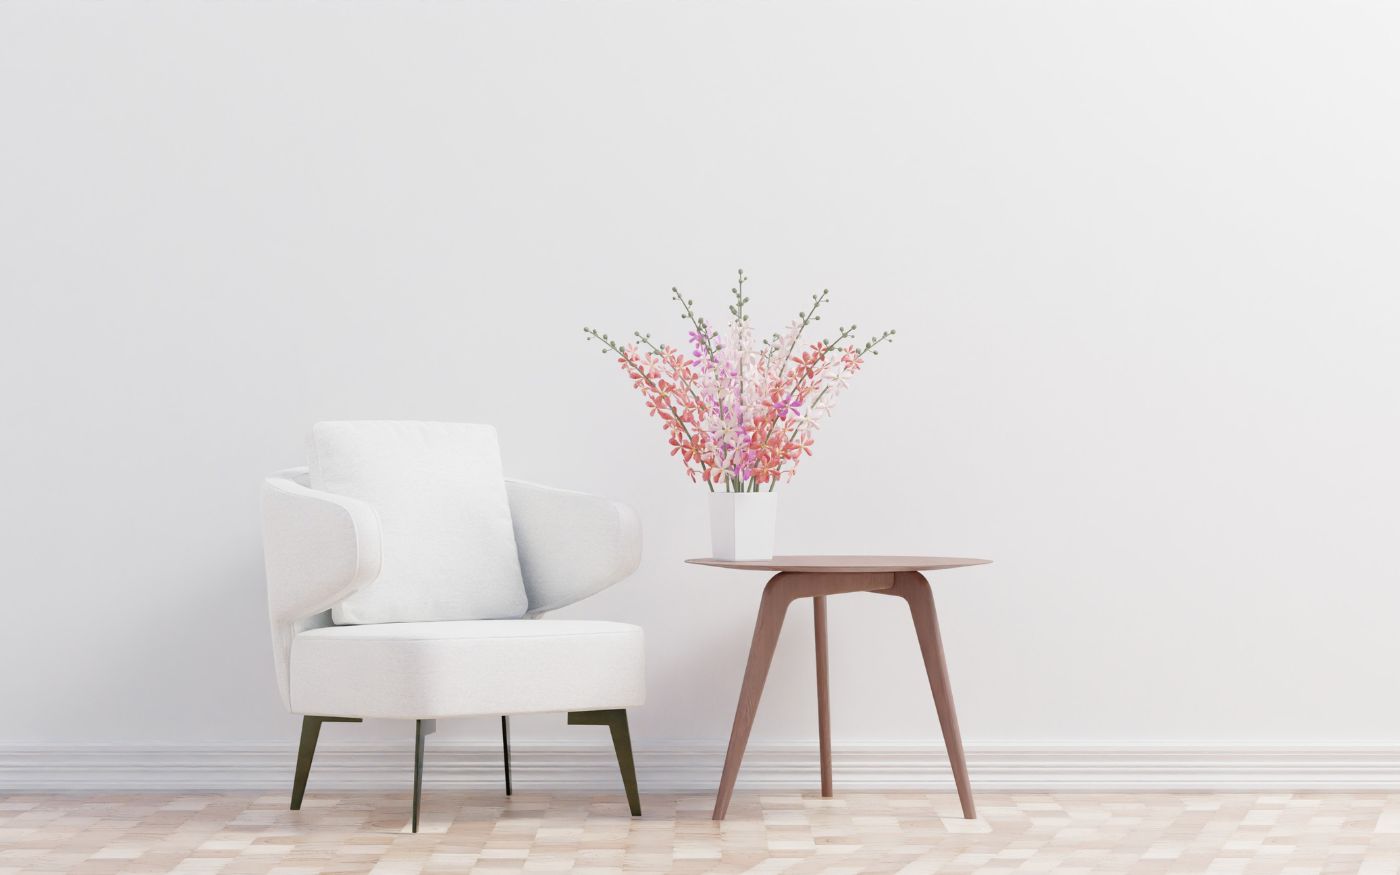 Minimalistic chair and table setup with flowers